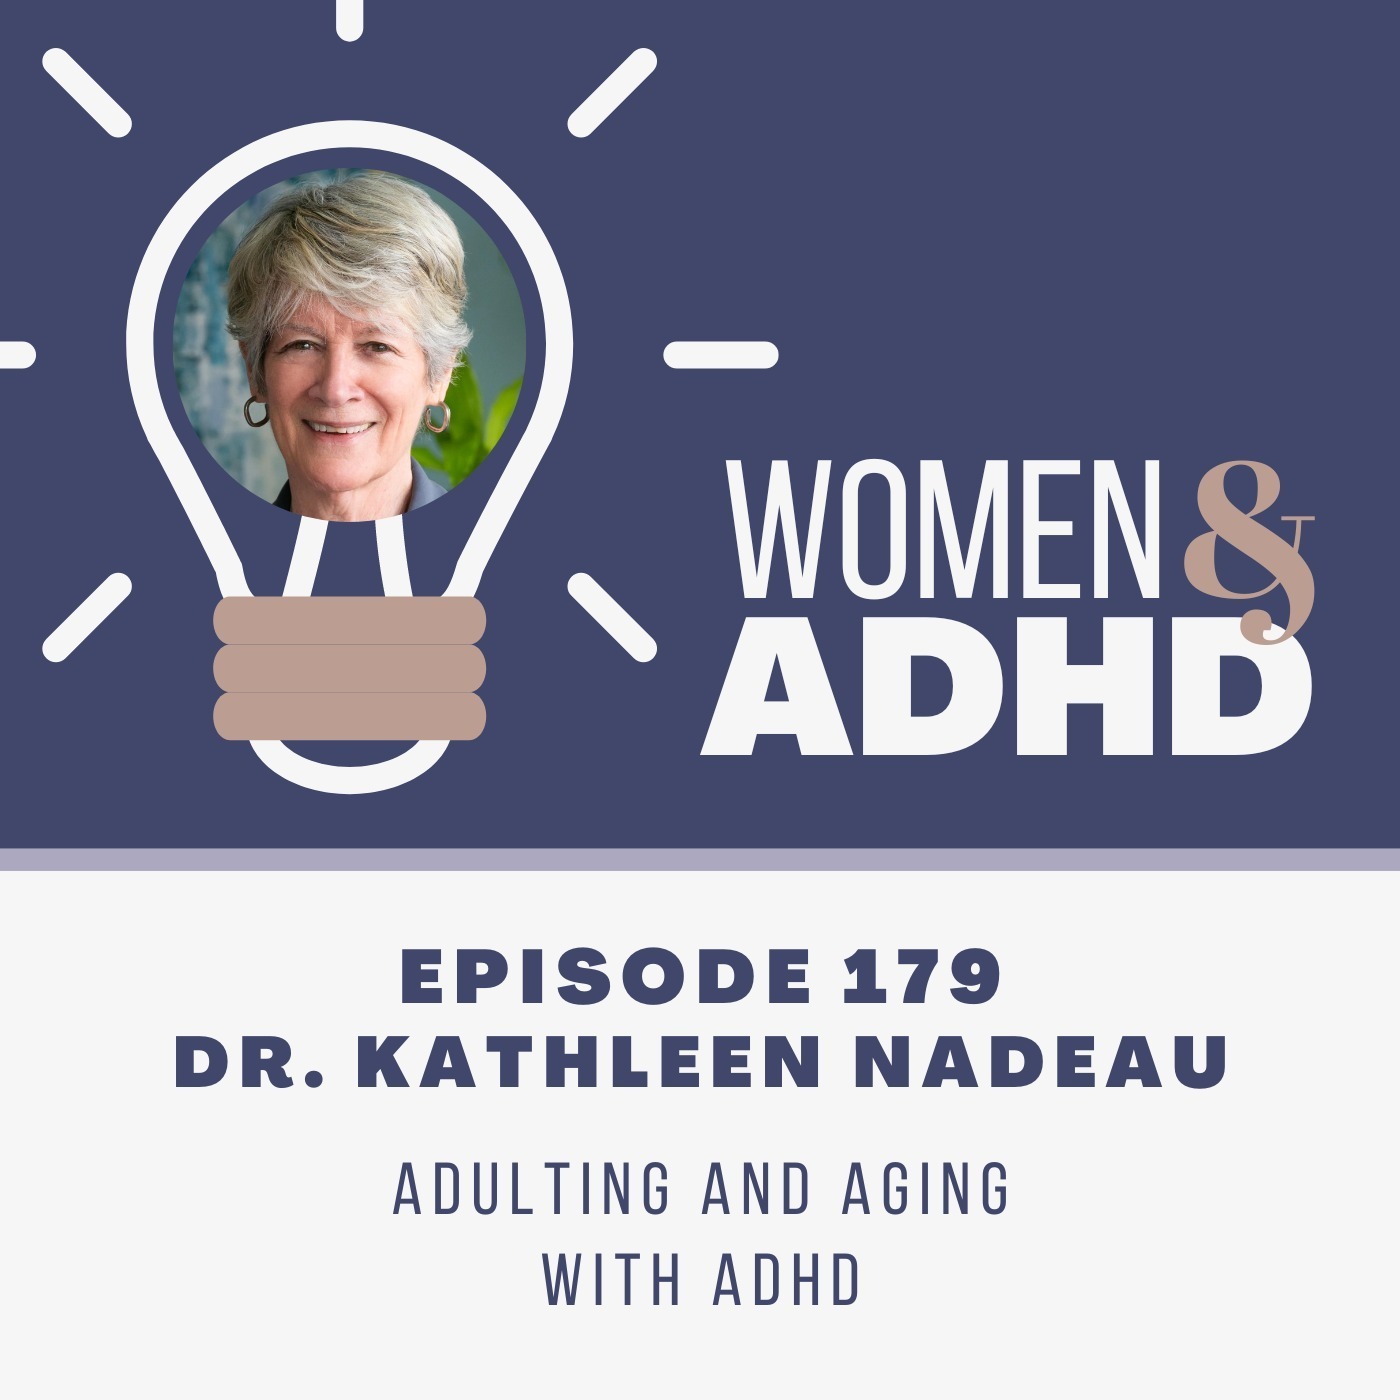 Dr. Kathleen Nadeau: Adulting and aging with ADHD